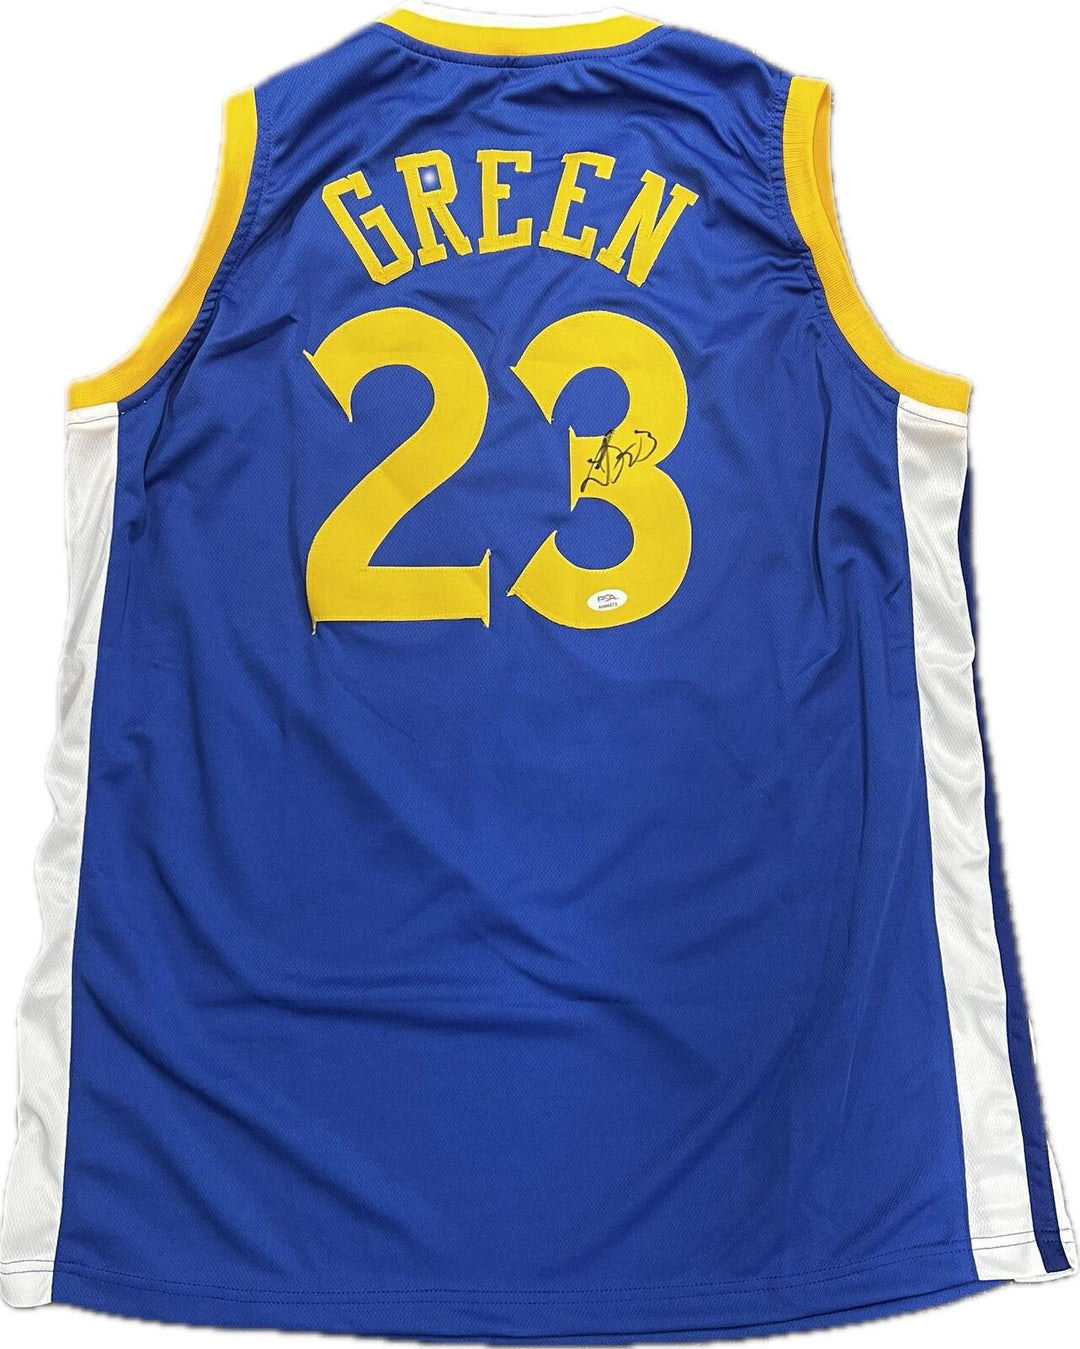 Draymond Green signed jersey PSA/DNA Golden State Warriors Autographed Image 1